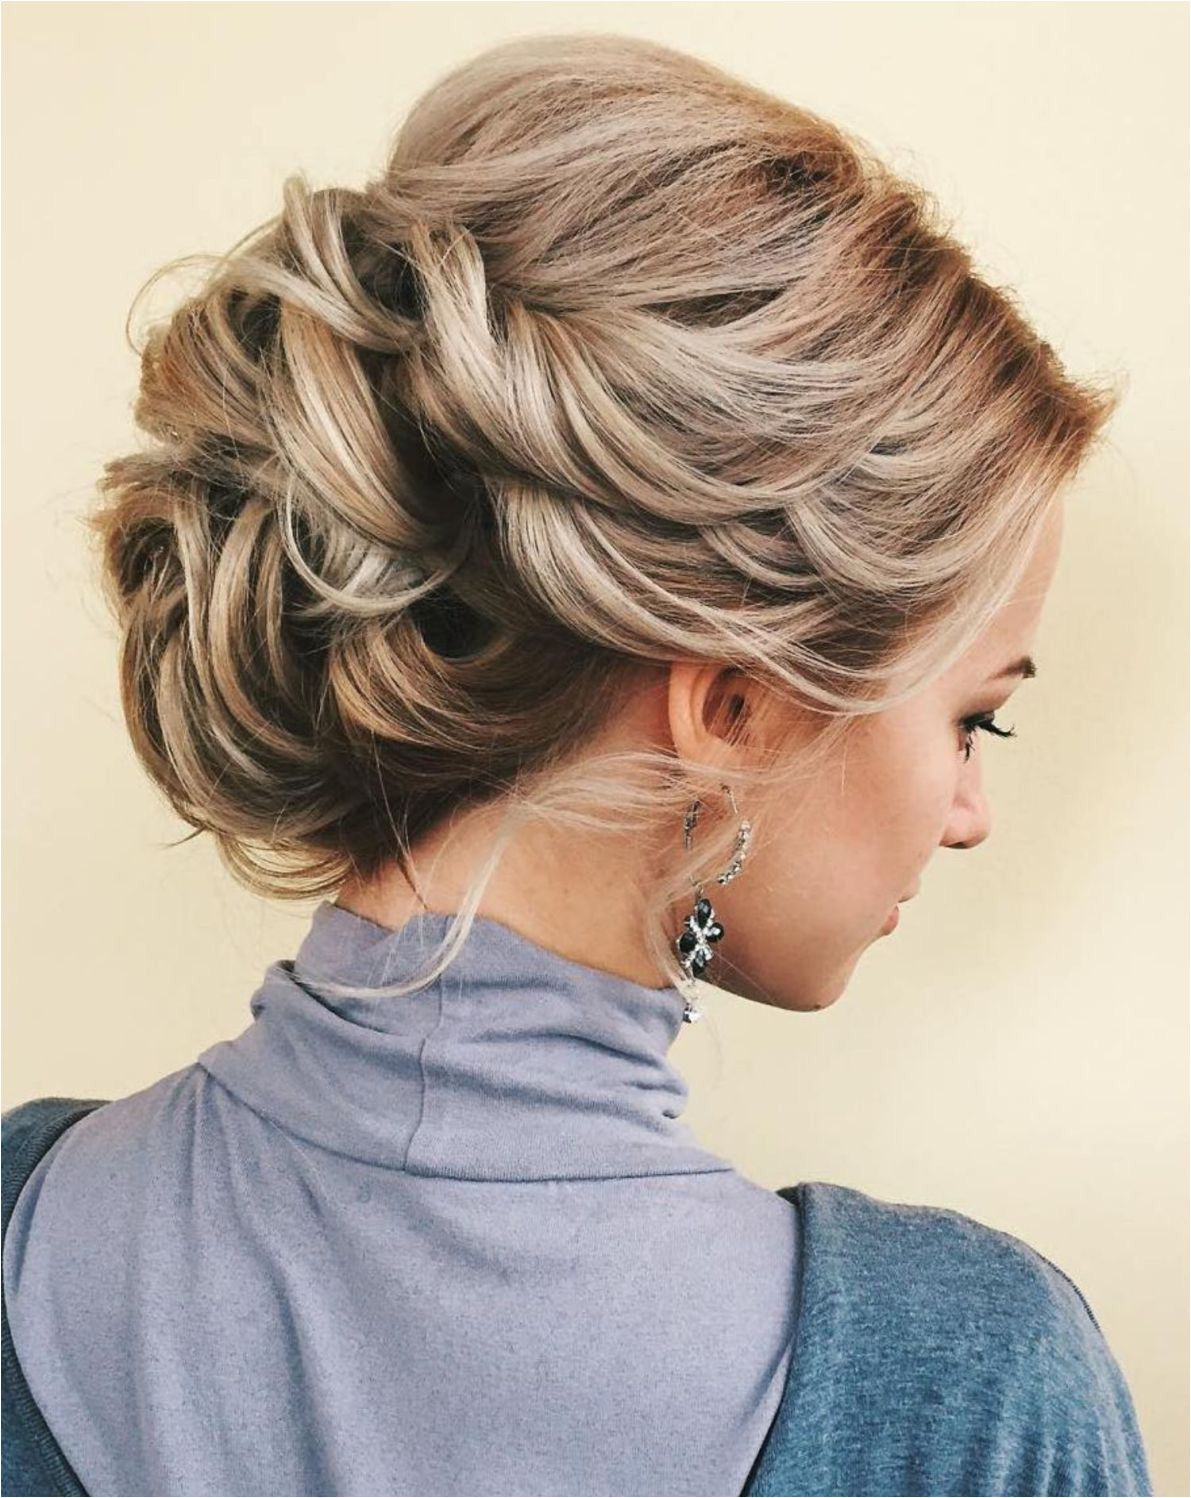 Loose Twisted Updo With A Bouffant Twisted Updo Braided Updo Wedding Hairstyles Thin Hair